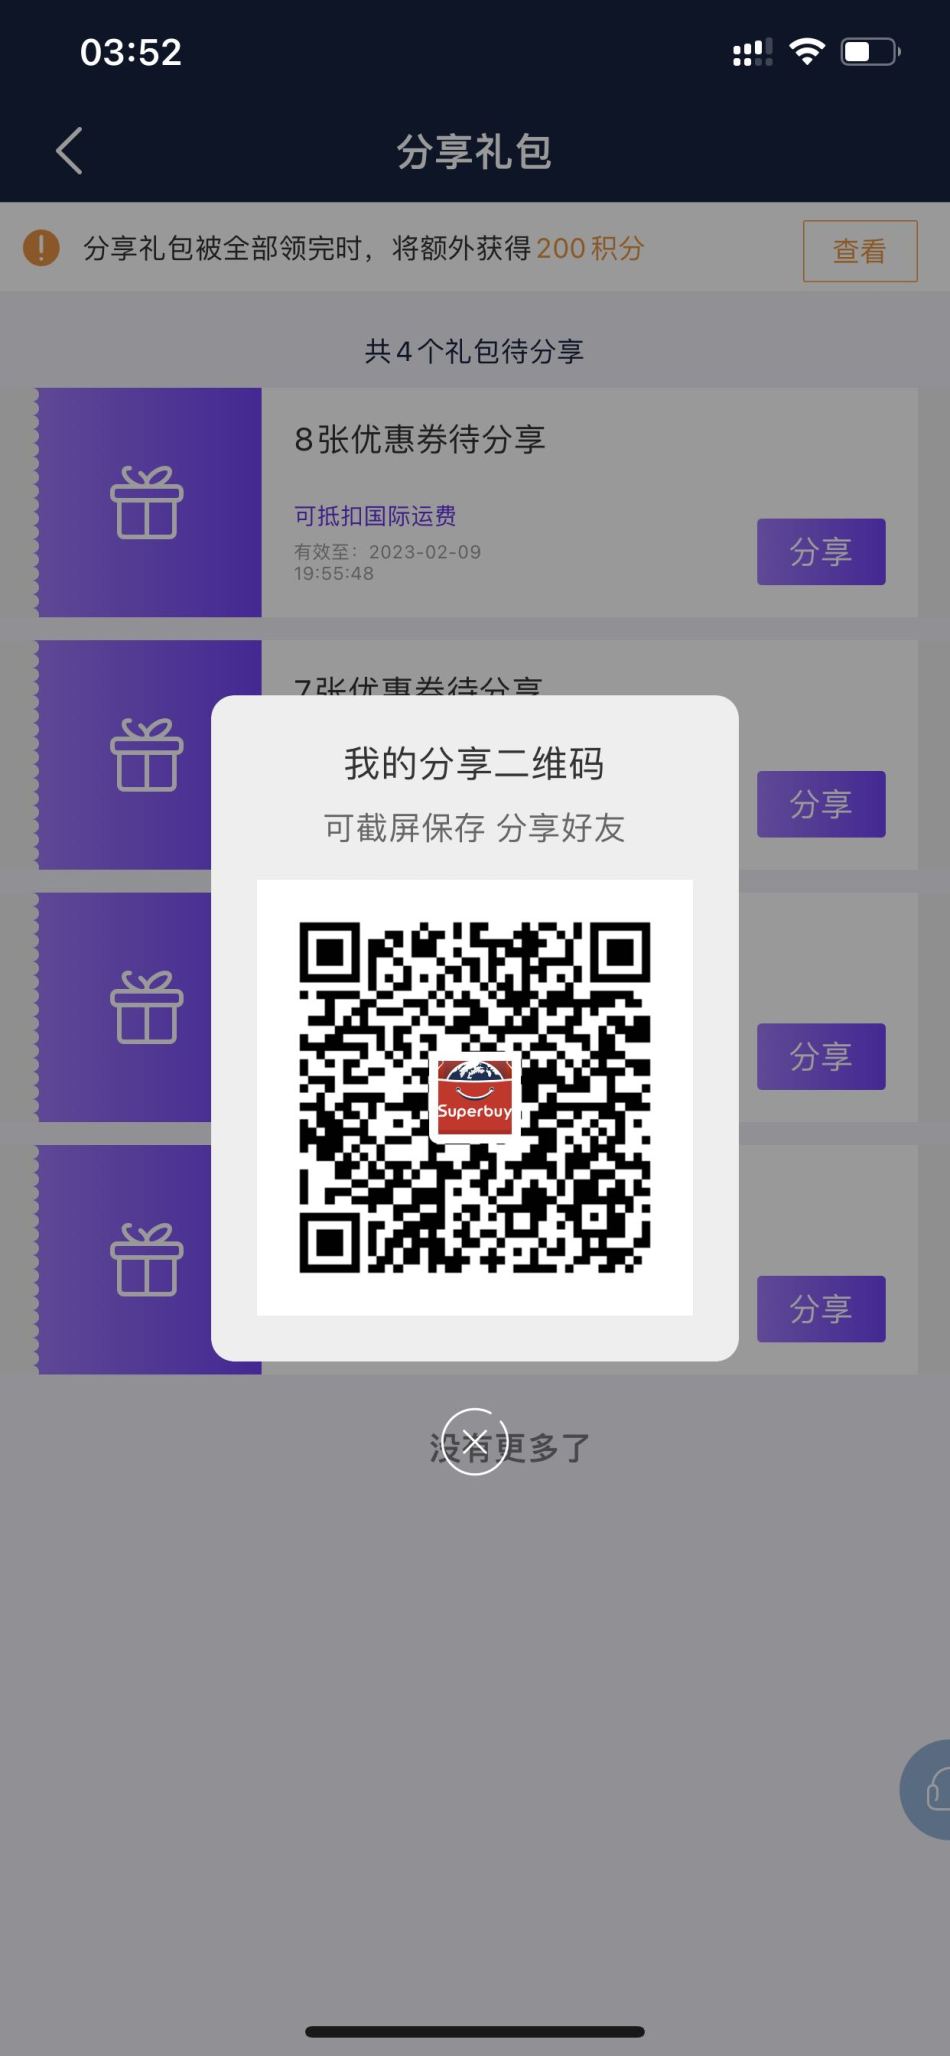 https://img1.superbuy.com/images/consult/2022/03/03/5dcfda04a6e99bd56f0feeb48a34abcd.jpg?x-oss-process=image/resize,w_950